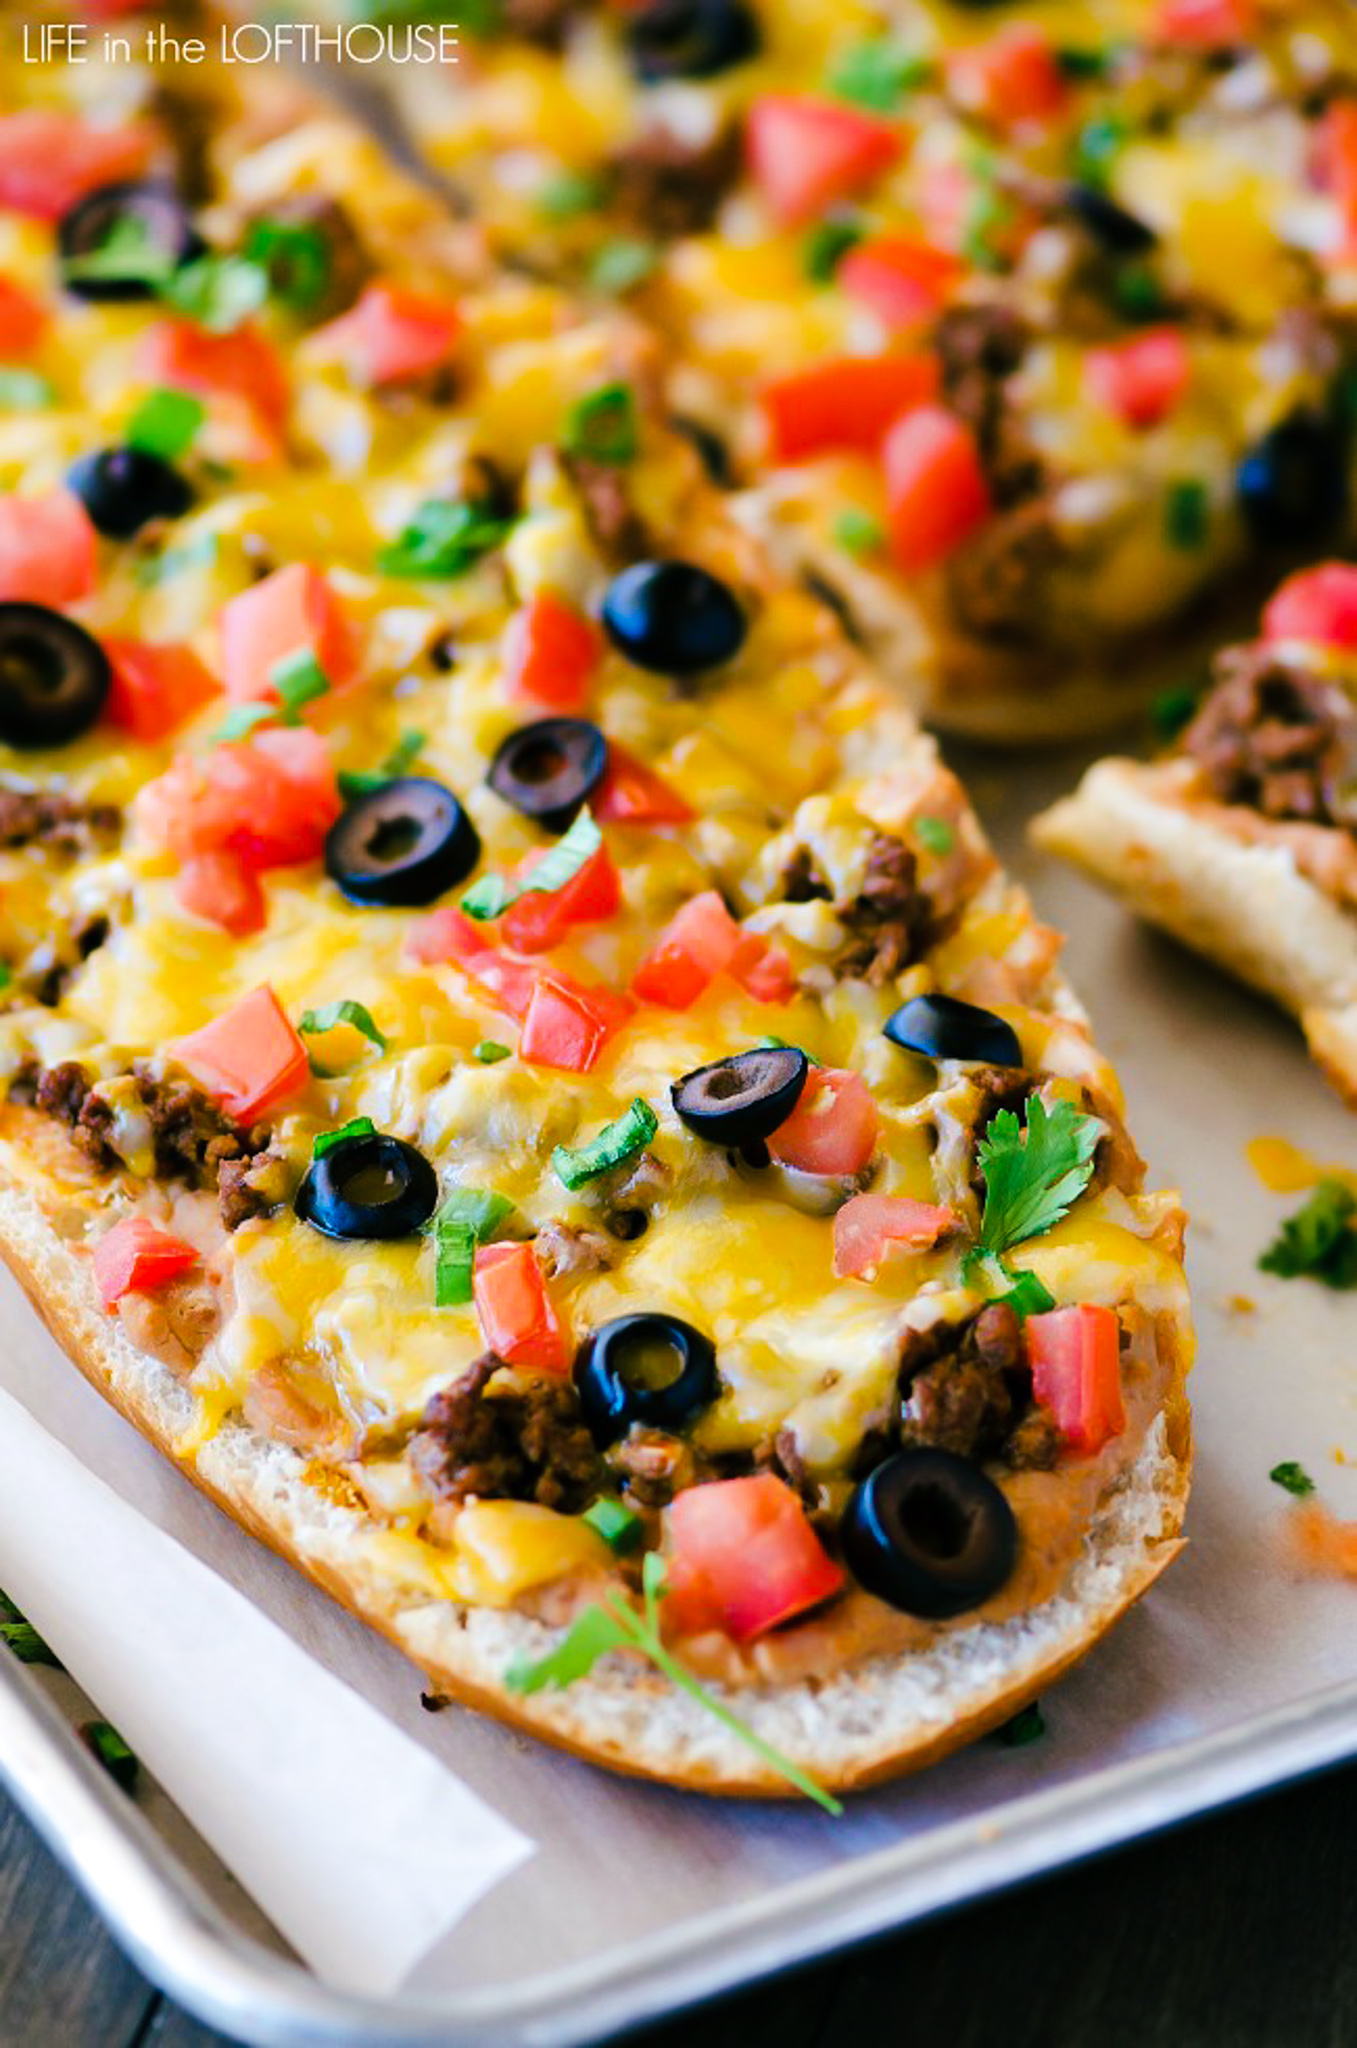 Taco French bread pizza has all the flavors of a taco transformed into a pizza using french bread. Life-in-the-Lofthouse.com